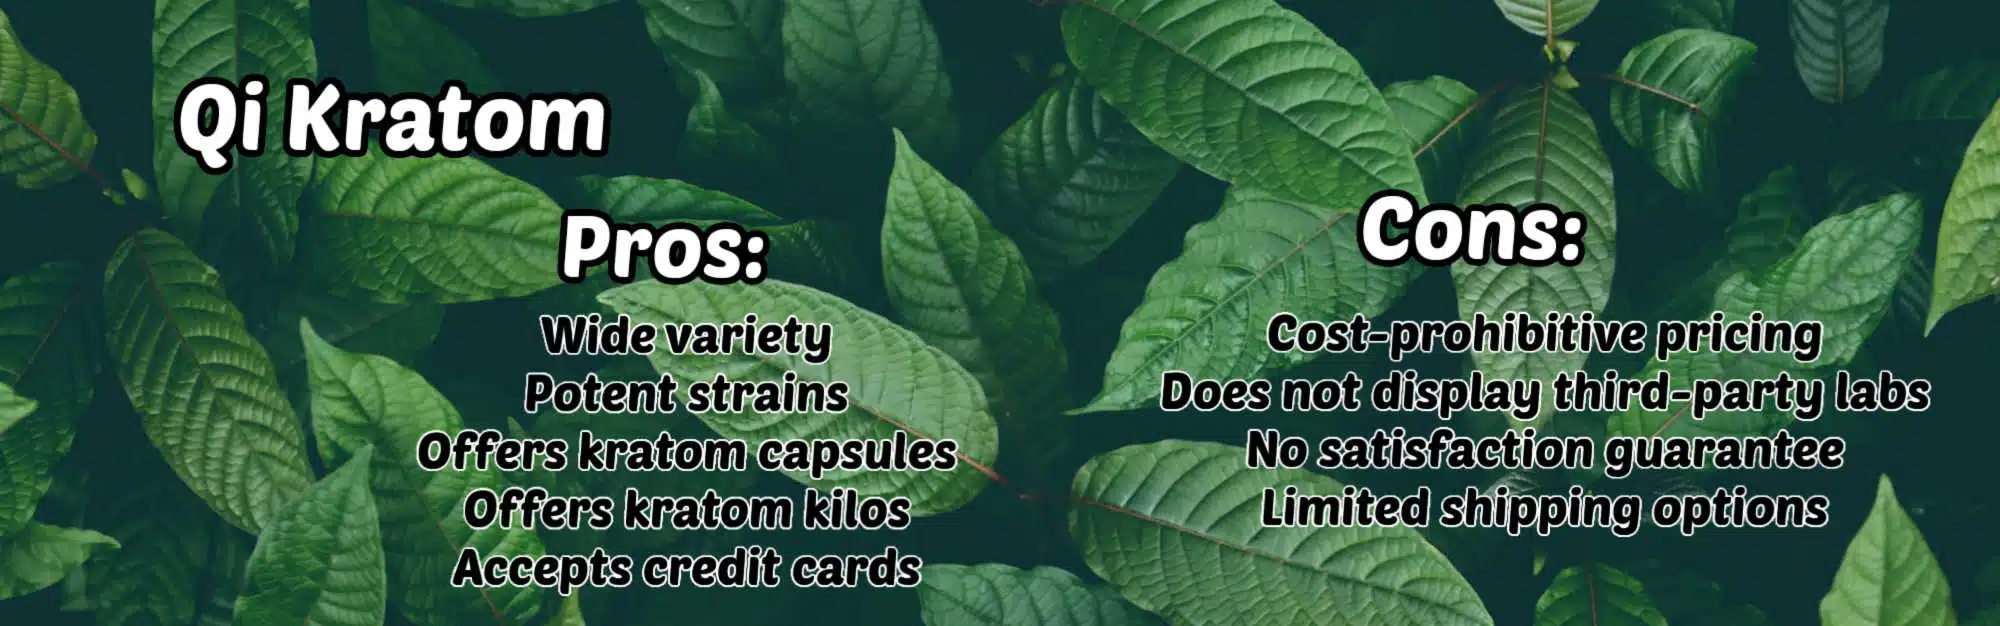 image of qi kratom pros and cons